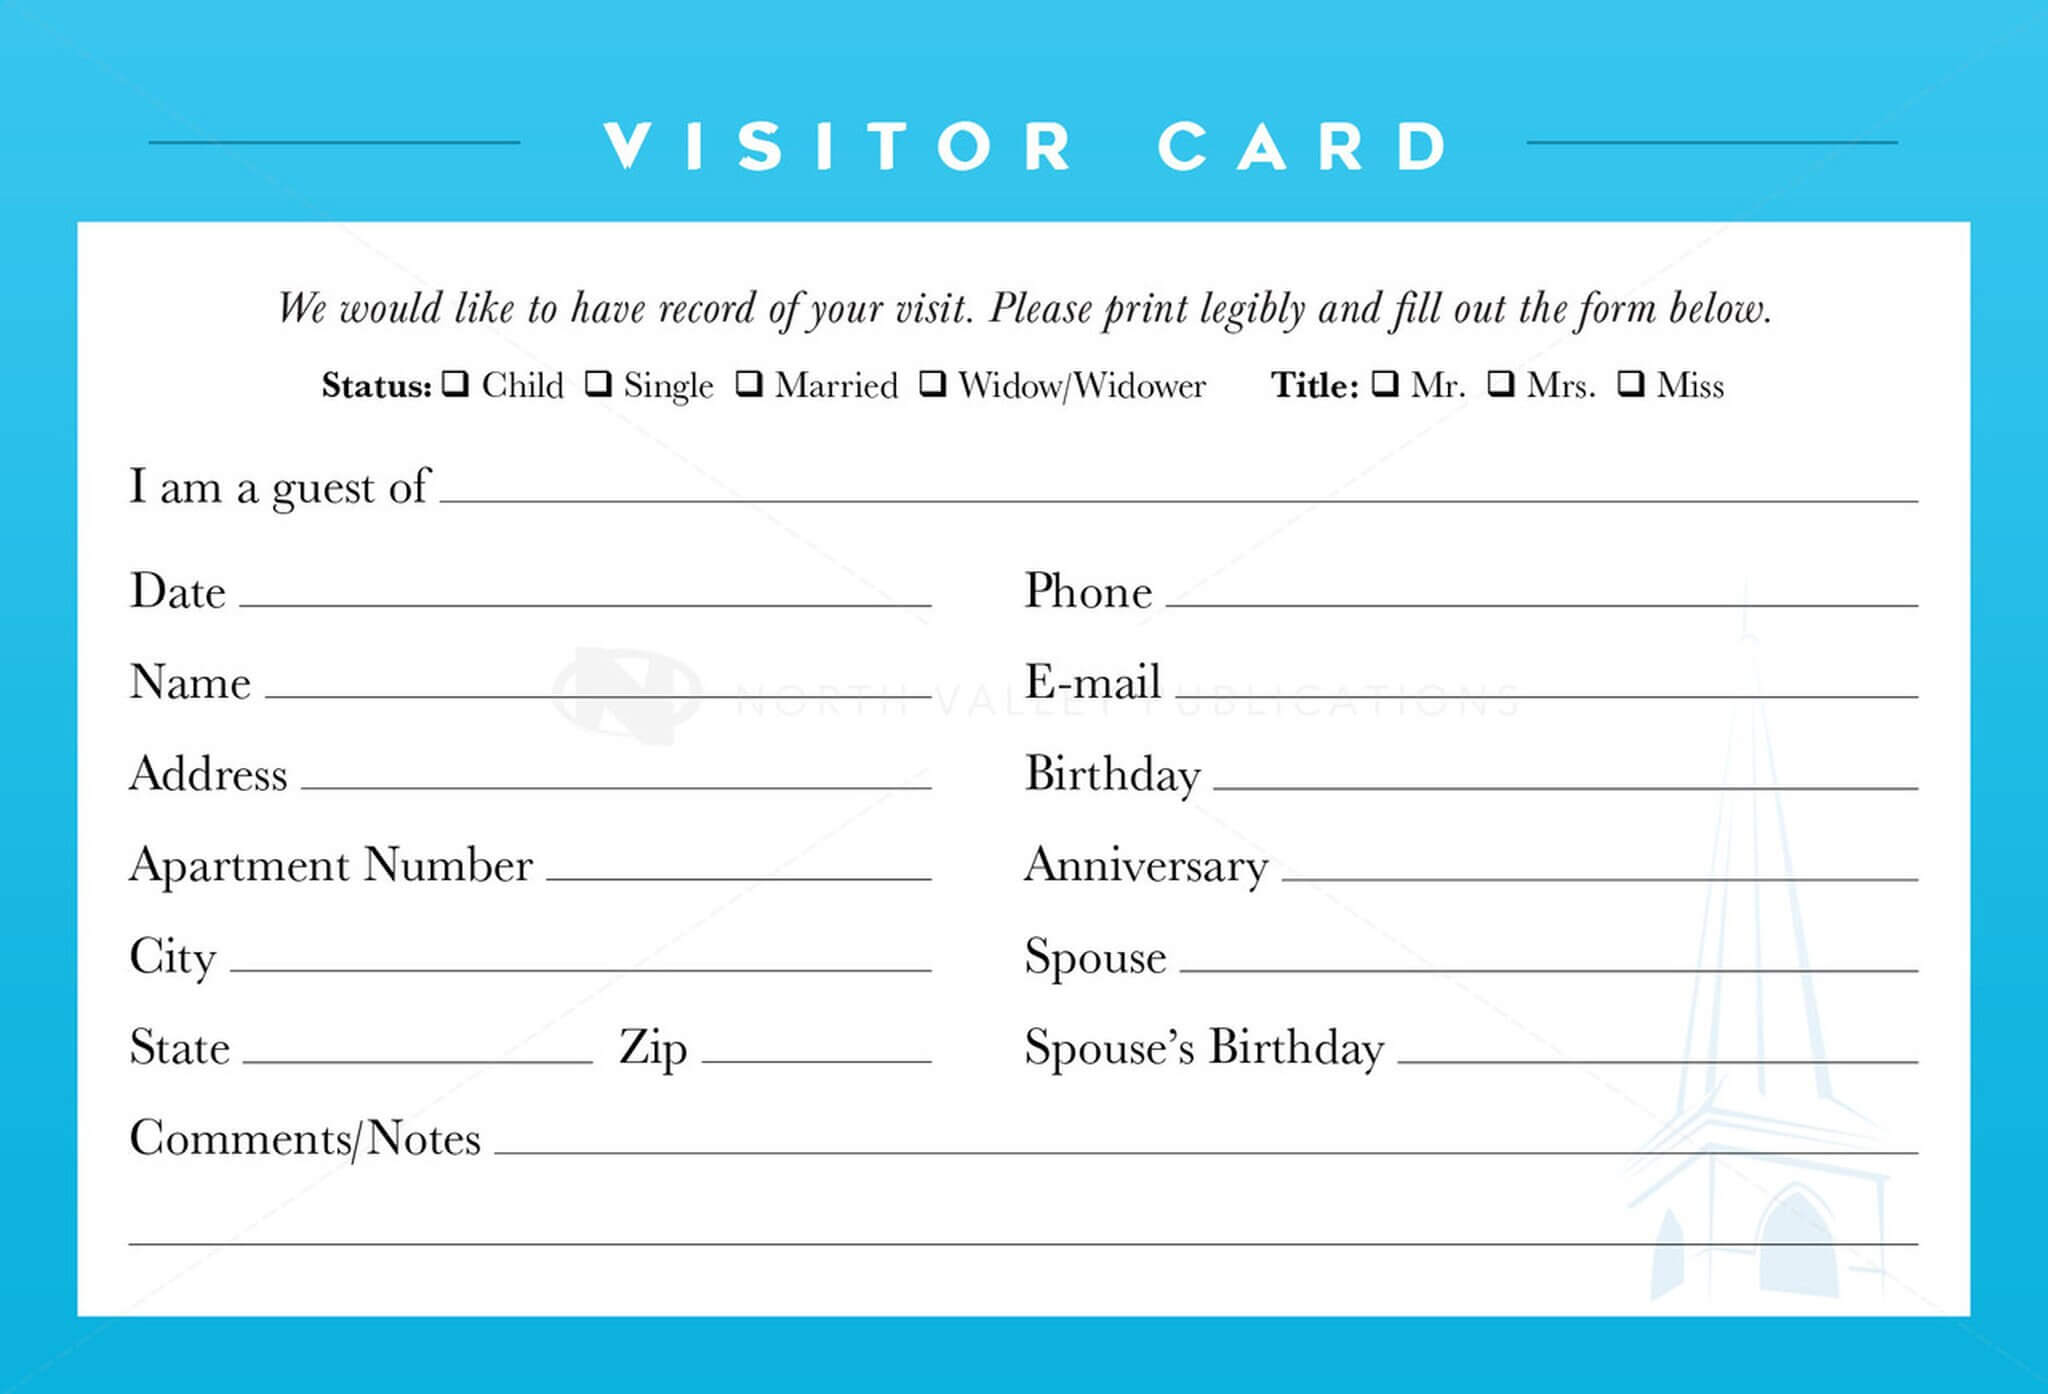 Guest Card Template Calep midnightpig co For Church Visitor Card